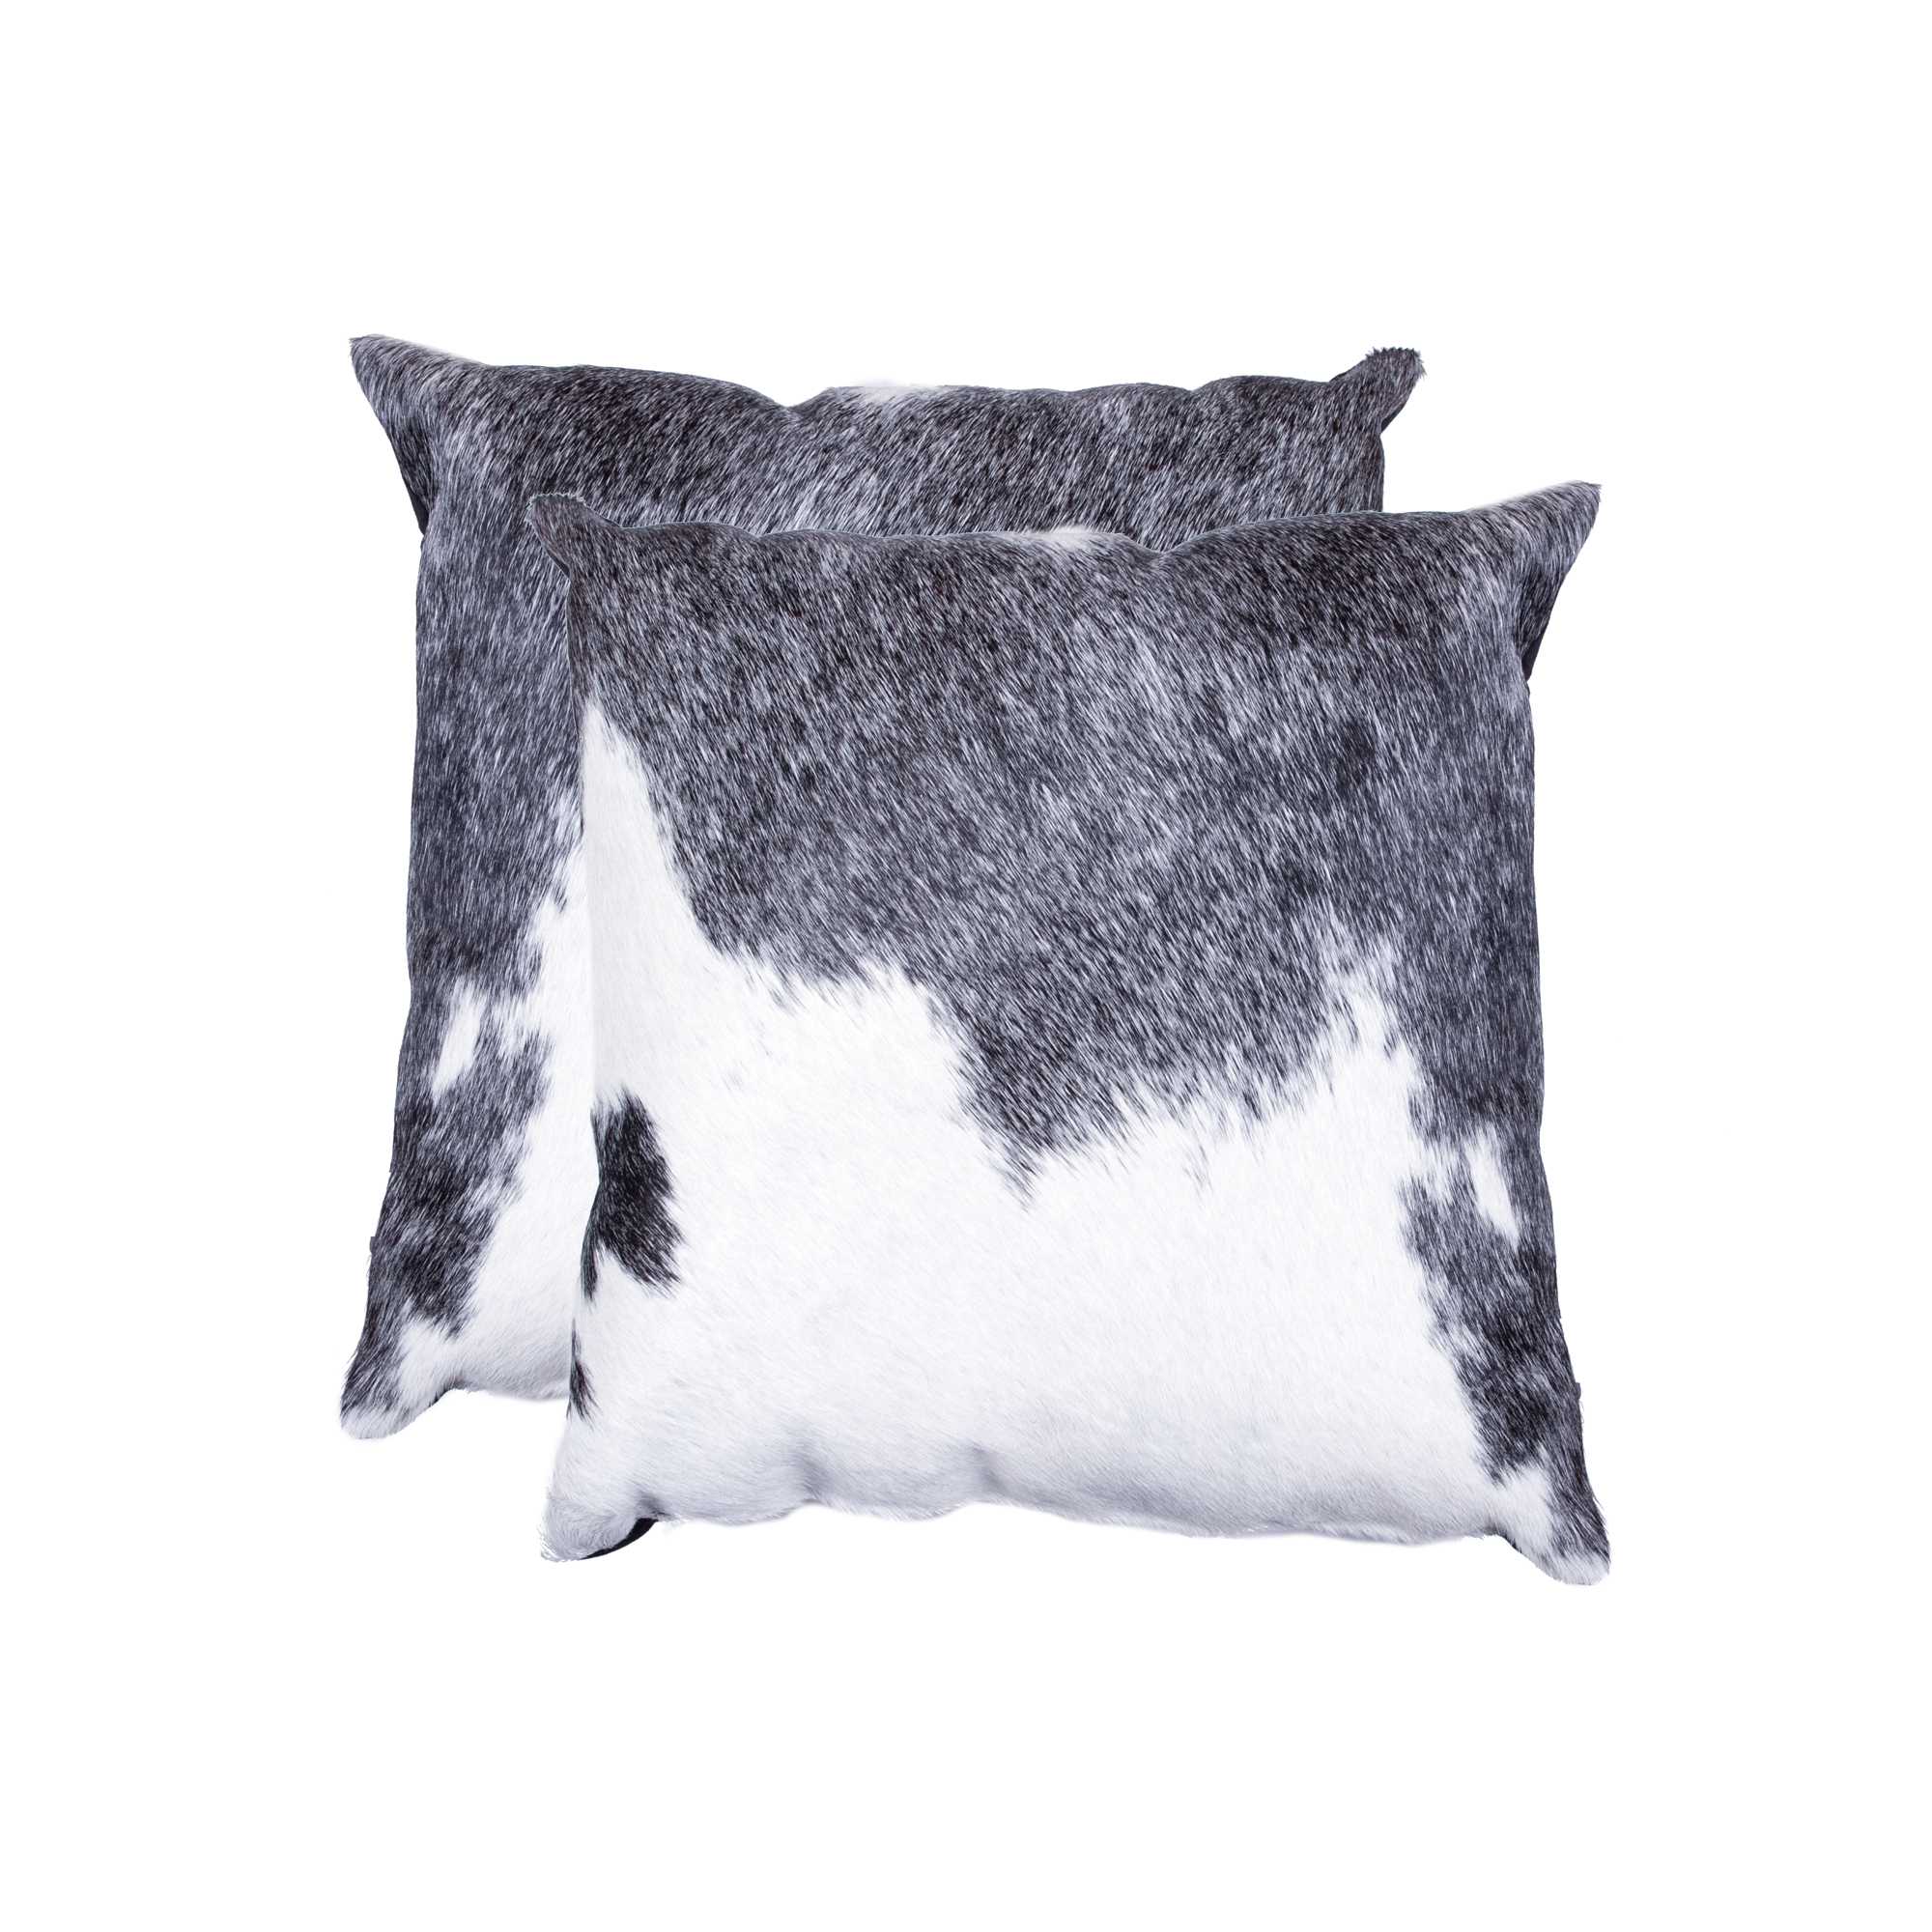 18" x 18" x 5" Gray And White Cowhide - Pillow 2-Pack